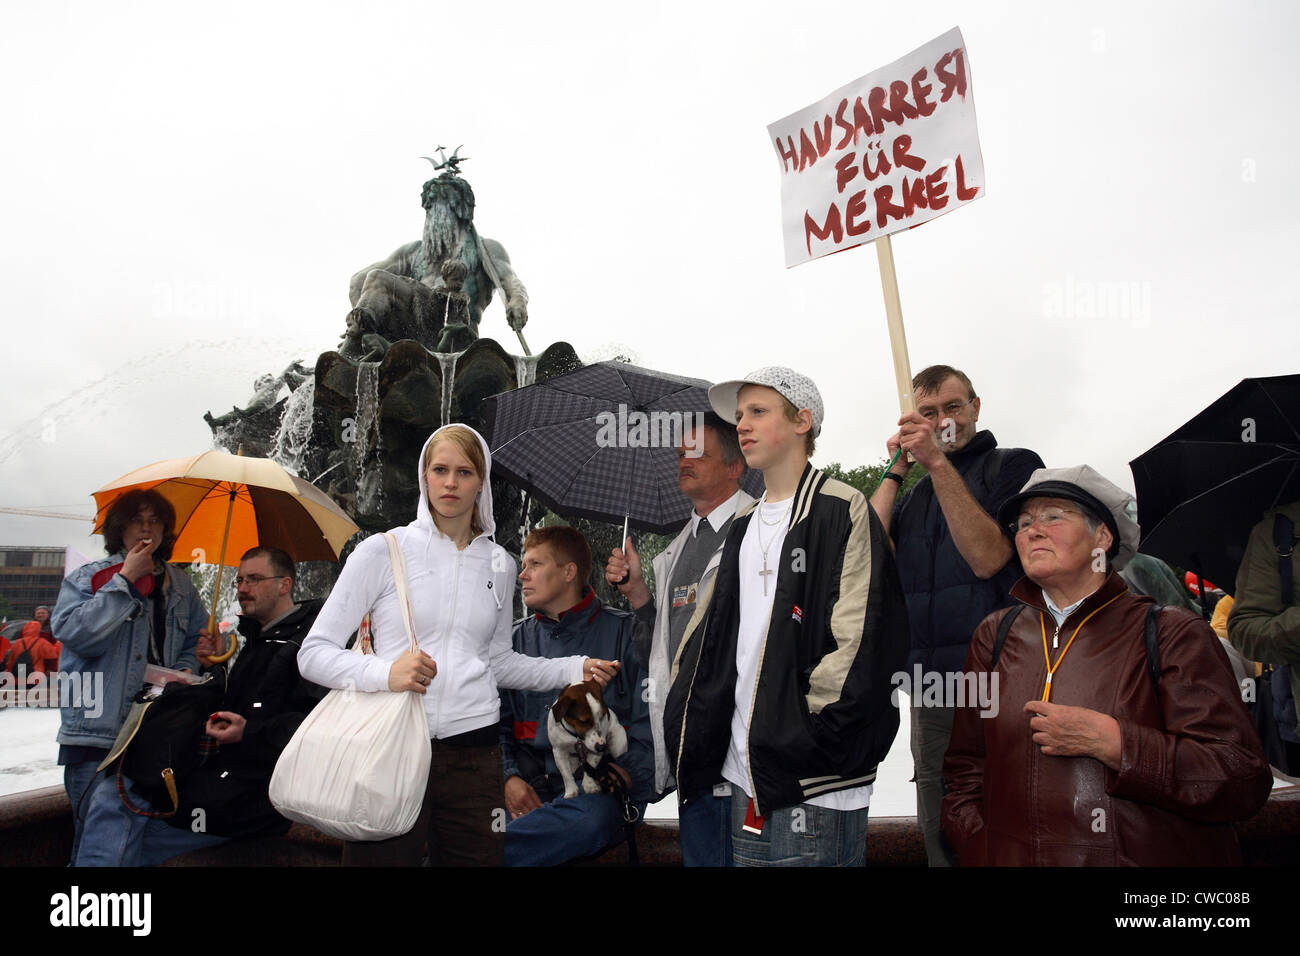 Demonstration against the welfare cuts Stock Photo